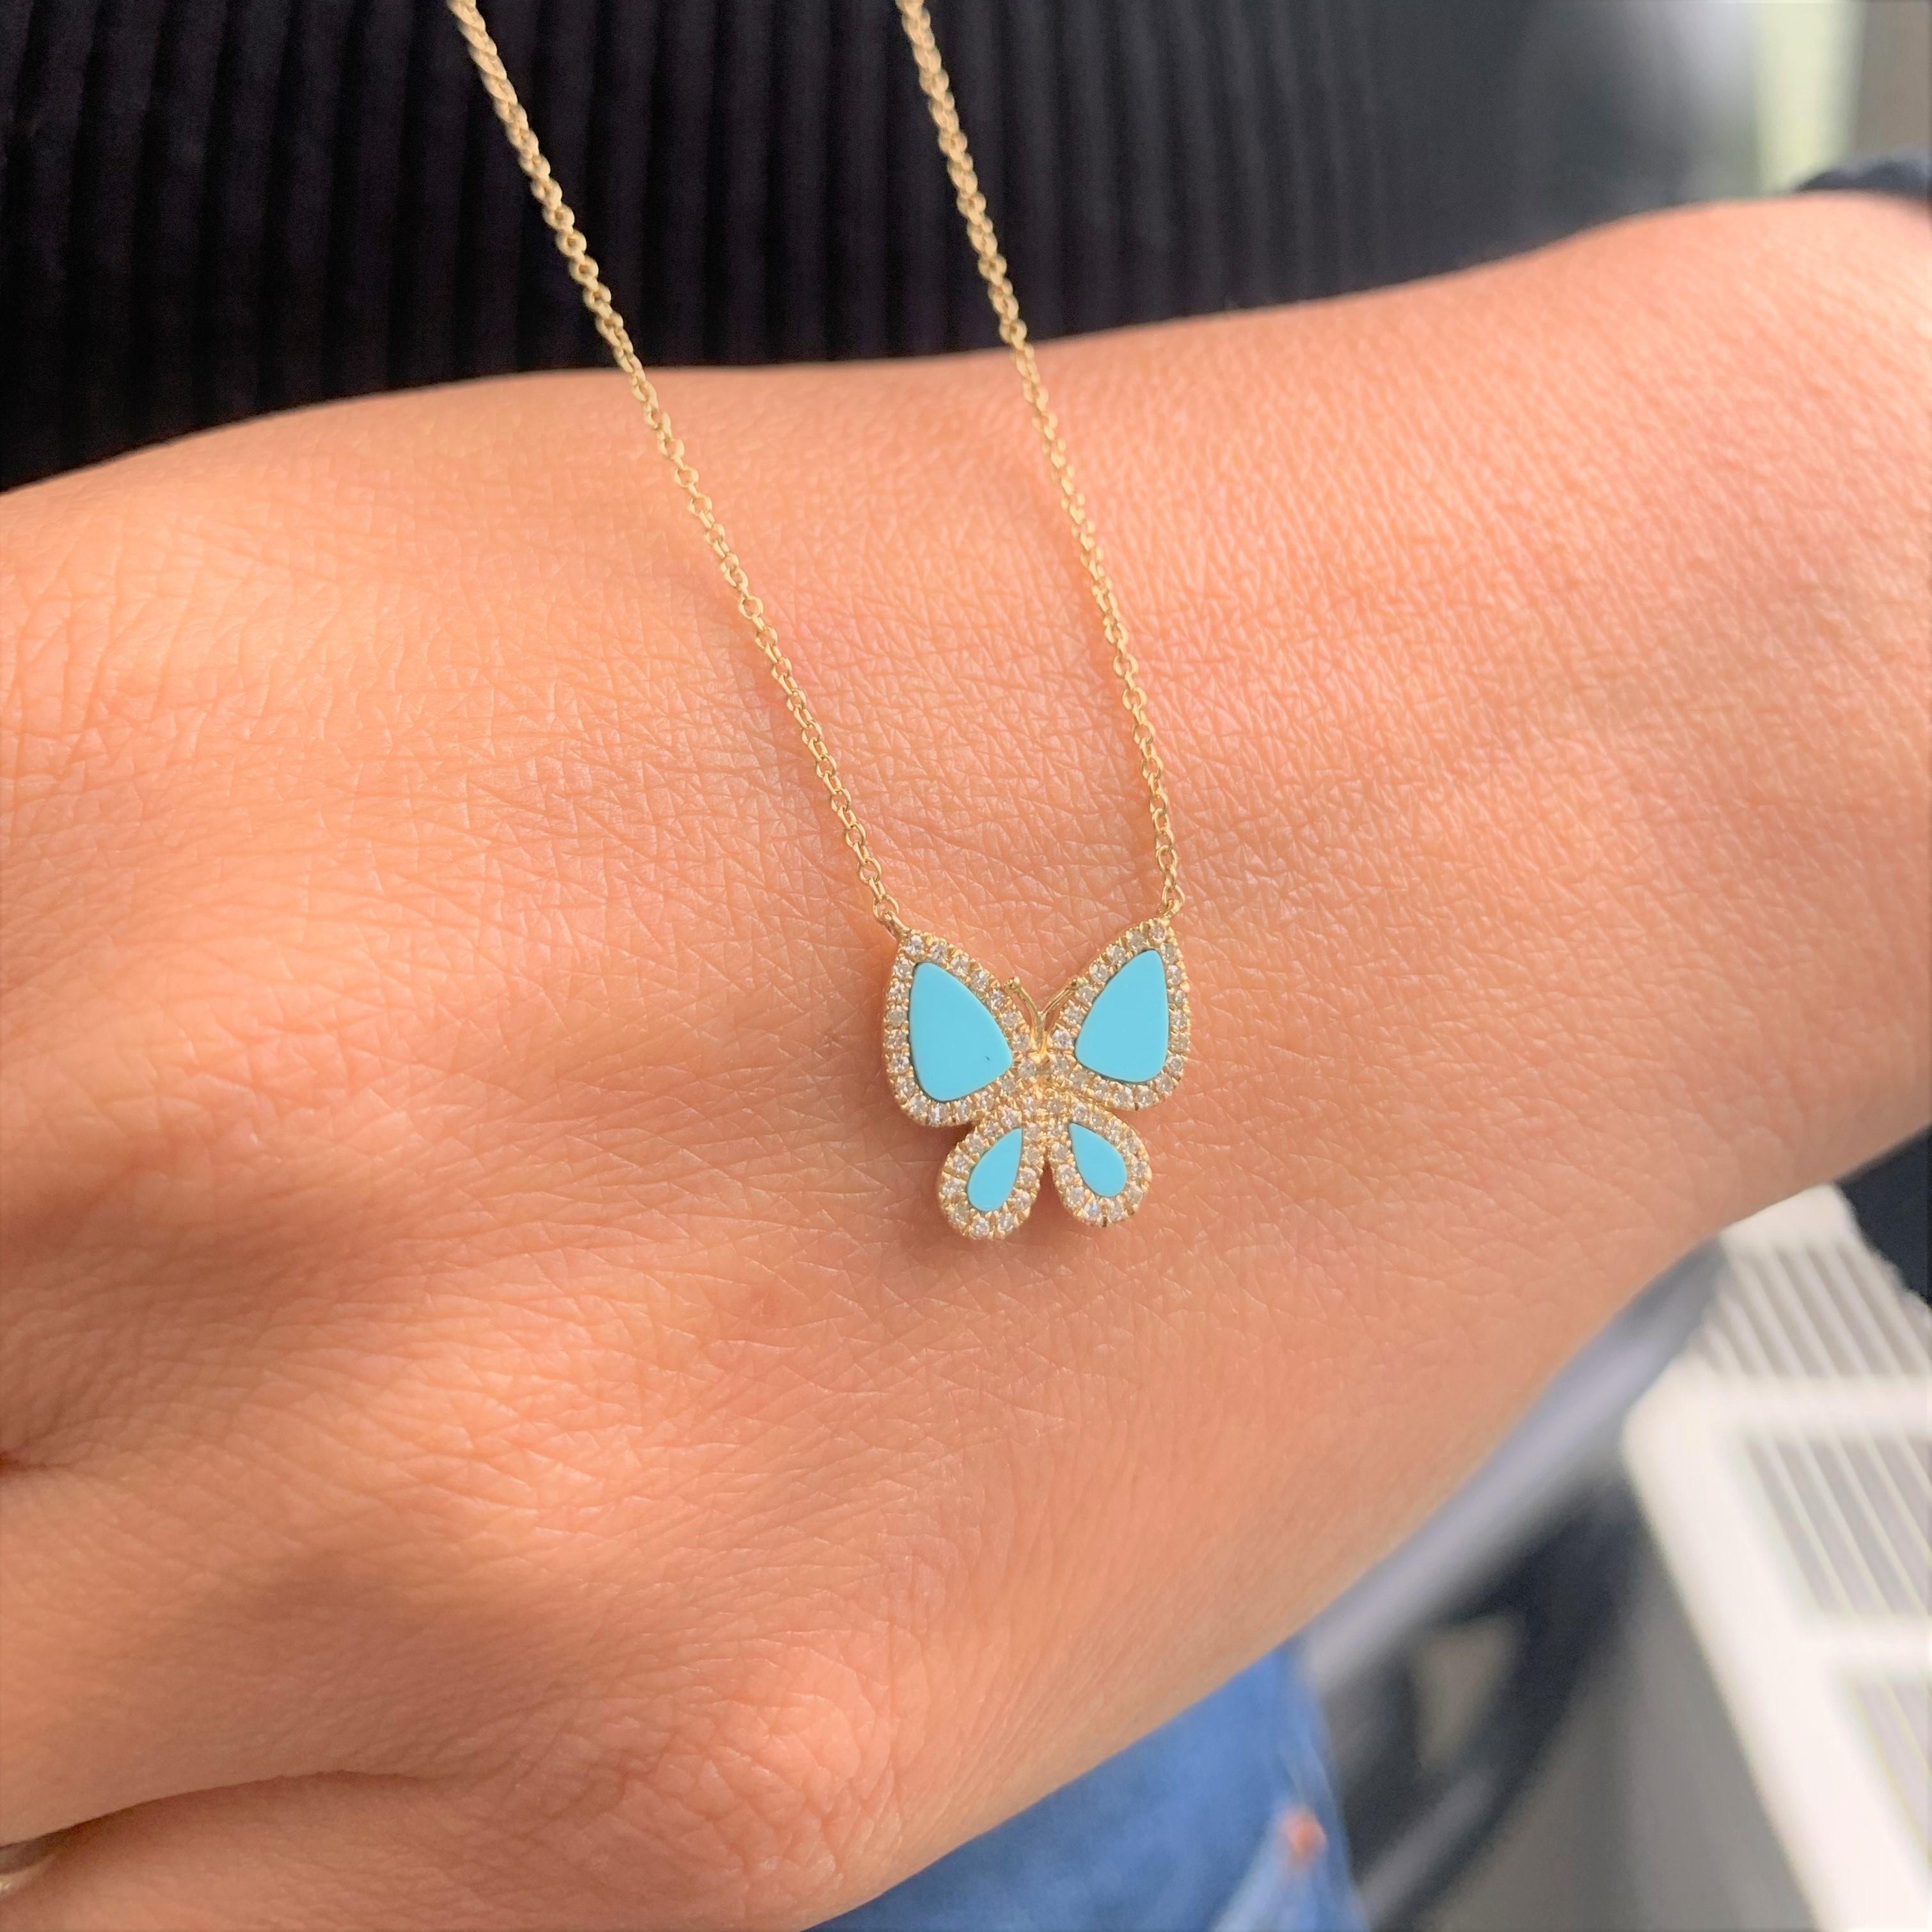 This is a Beautiful Butterfly Necklace! Crafted of 14K Yellow Gold featuring a Blue Turquoise Butterfly surrounded with a row of Diamonds approximately 0.15cts Chain is Adjustable 16-18